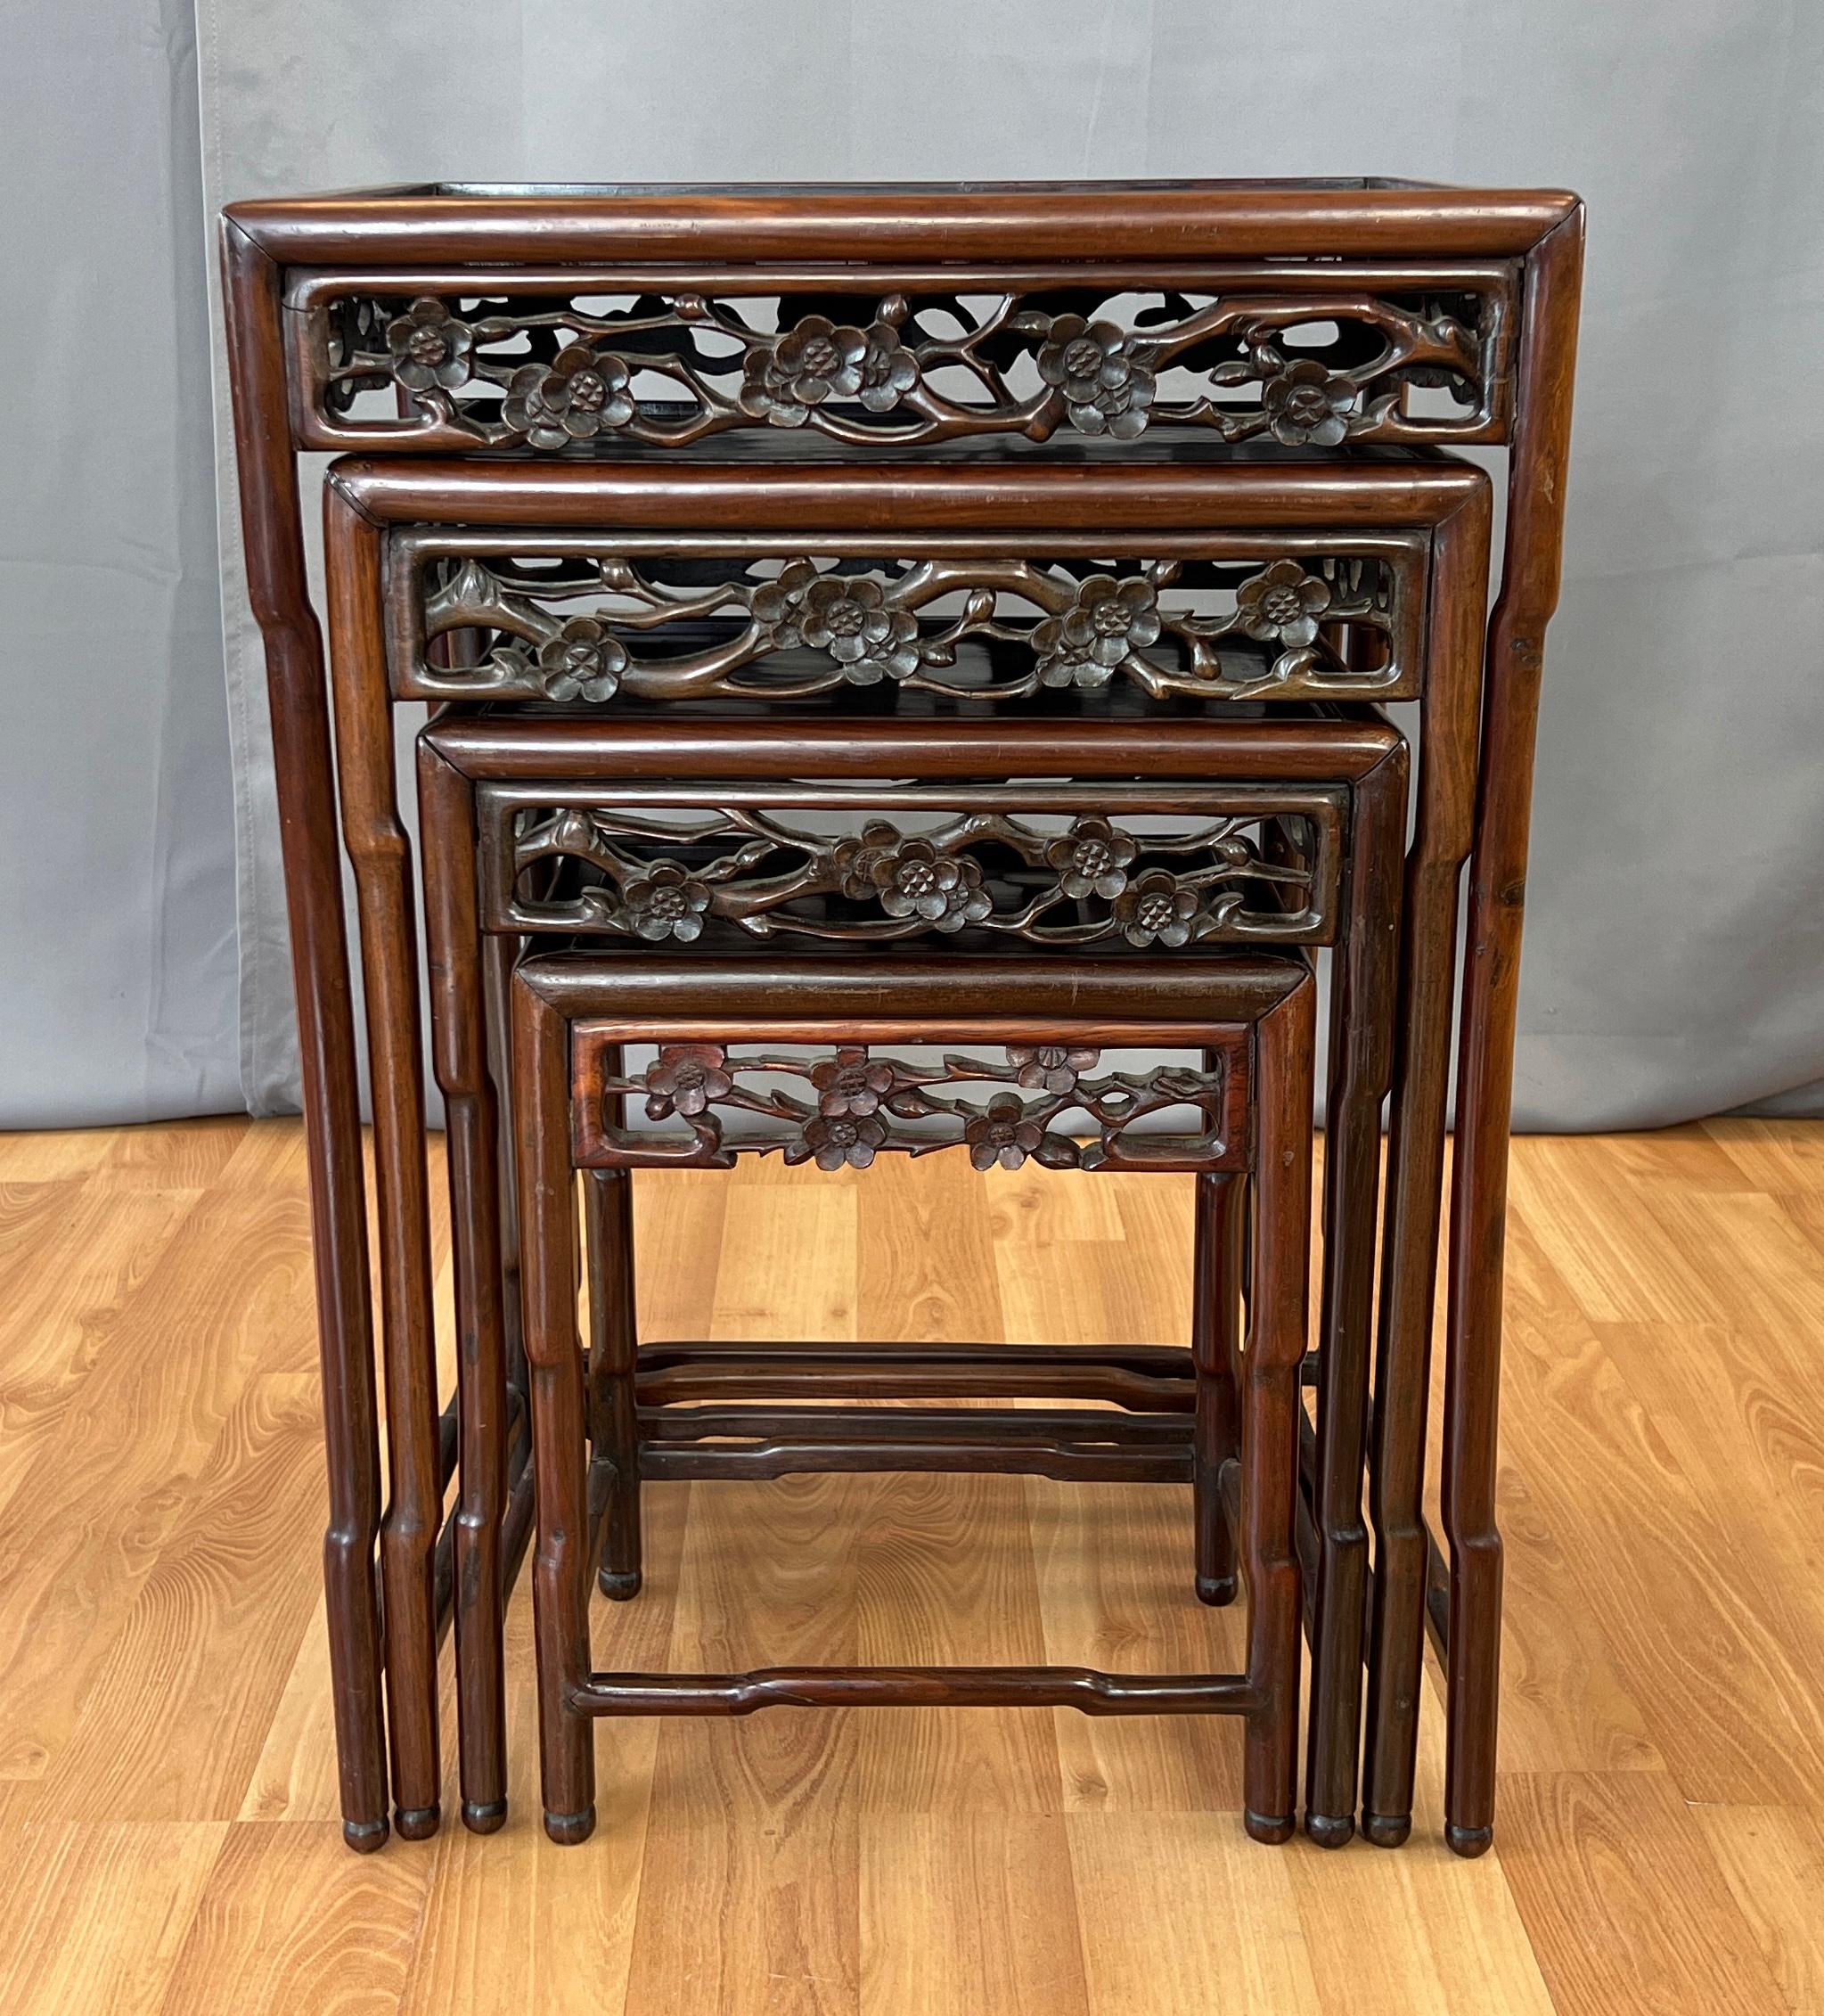 Set of Four Late 19th or Early 20th Century Chinese Nesting Tables of Zitan Wood In Fair Condition For Sale In San Francisco, CA